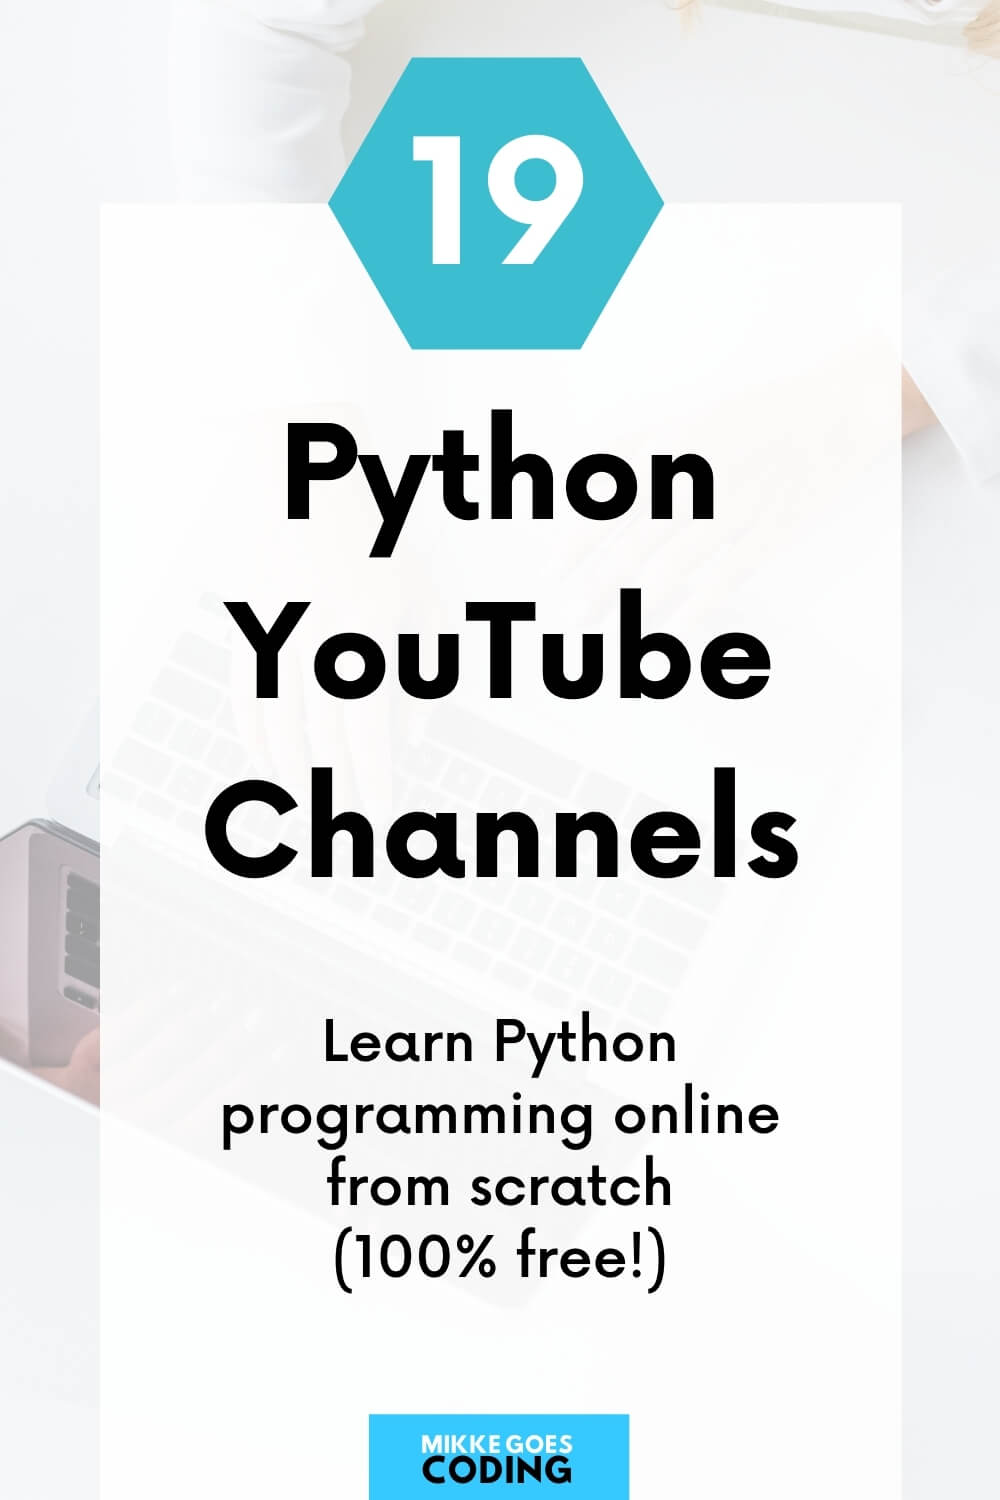 The best Python YouTube channels to learn programming